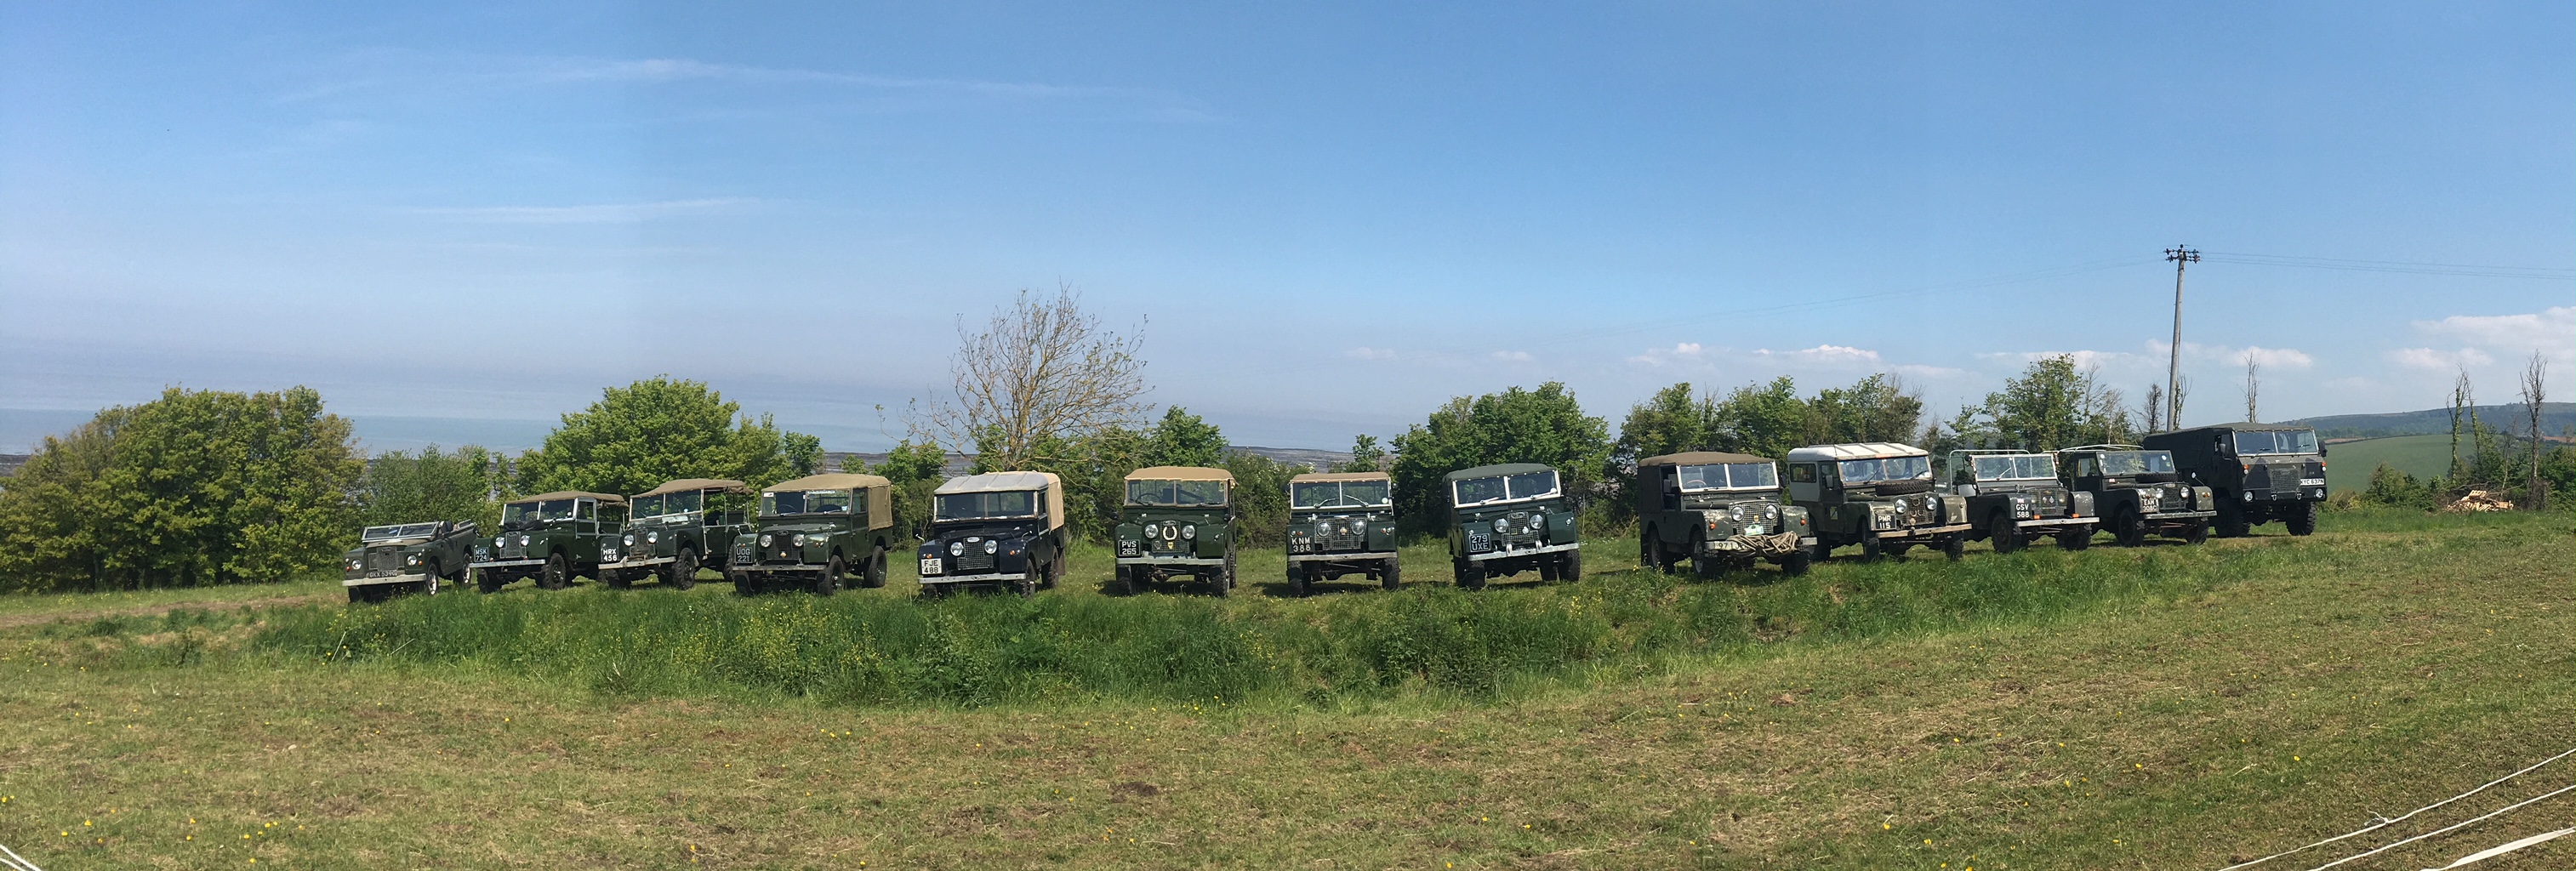 show us your land rover - Page 96 - Land Rover - PistonHeads